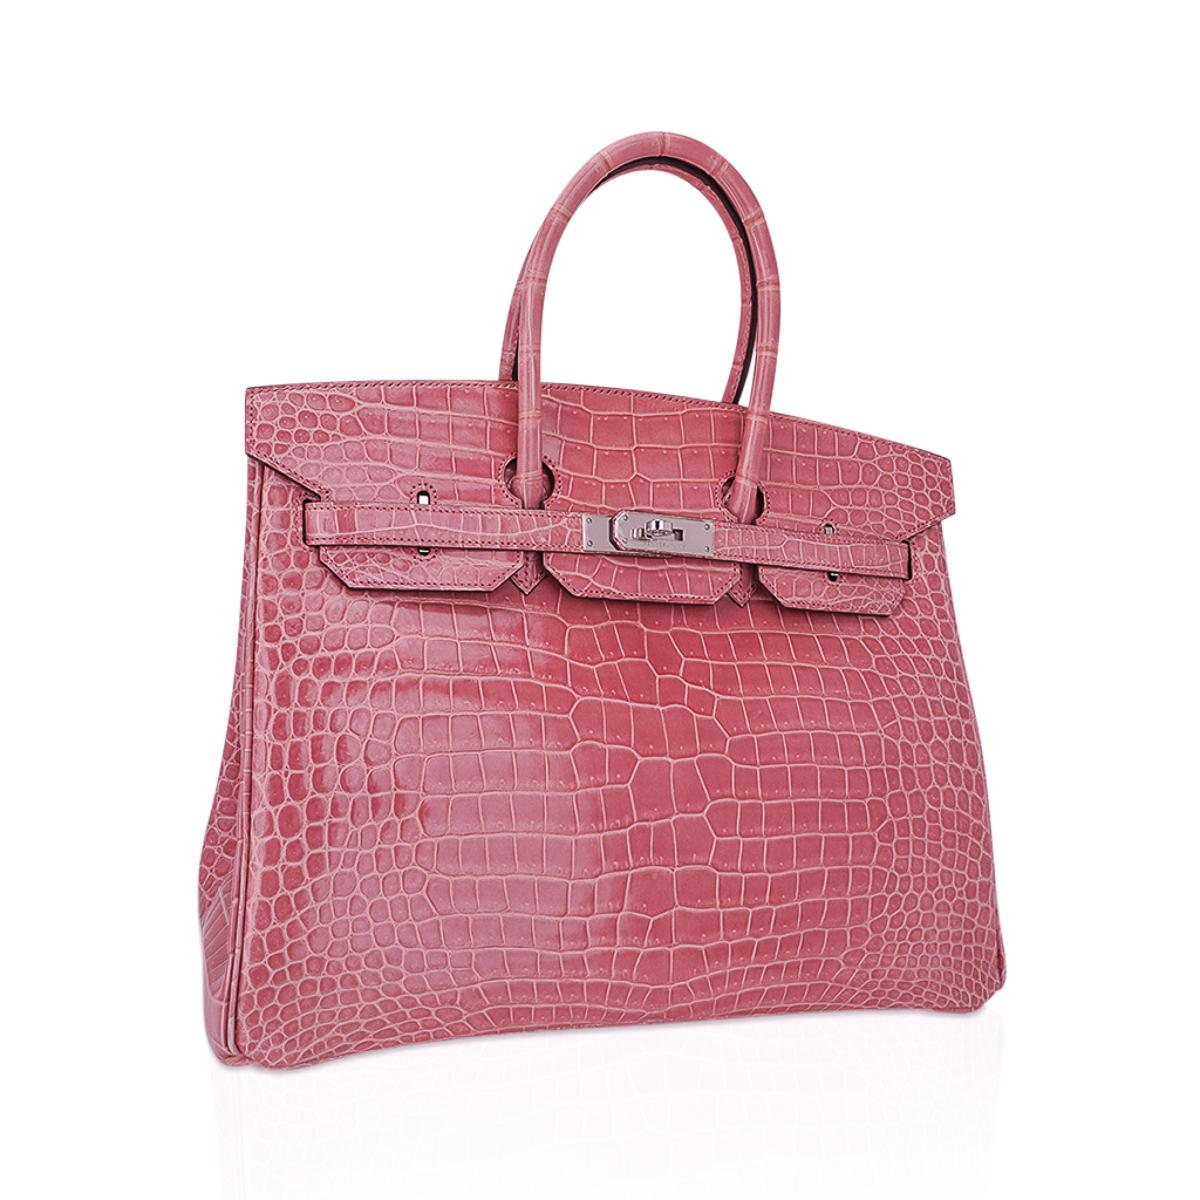 Mightychic offers an Hermes Birkin 35 bag in uber rare Rose Indien Porosus Crocodile.
This rare and exquisite soft dusty pink with subtle blue undertone crocodile Birkin is a collectors find as the colour has been retired and is not